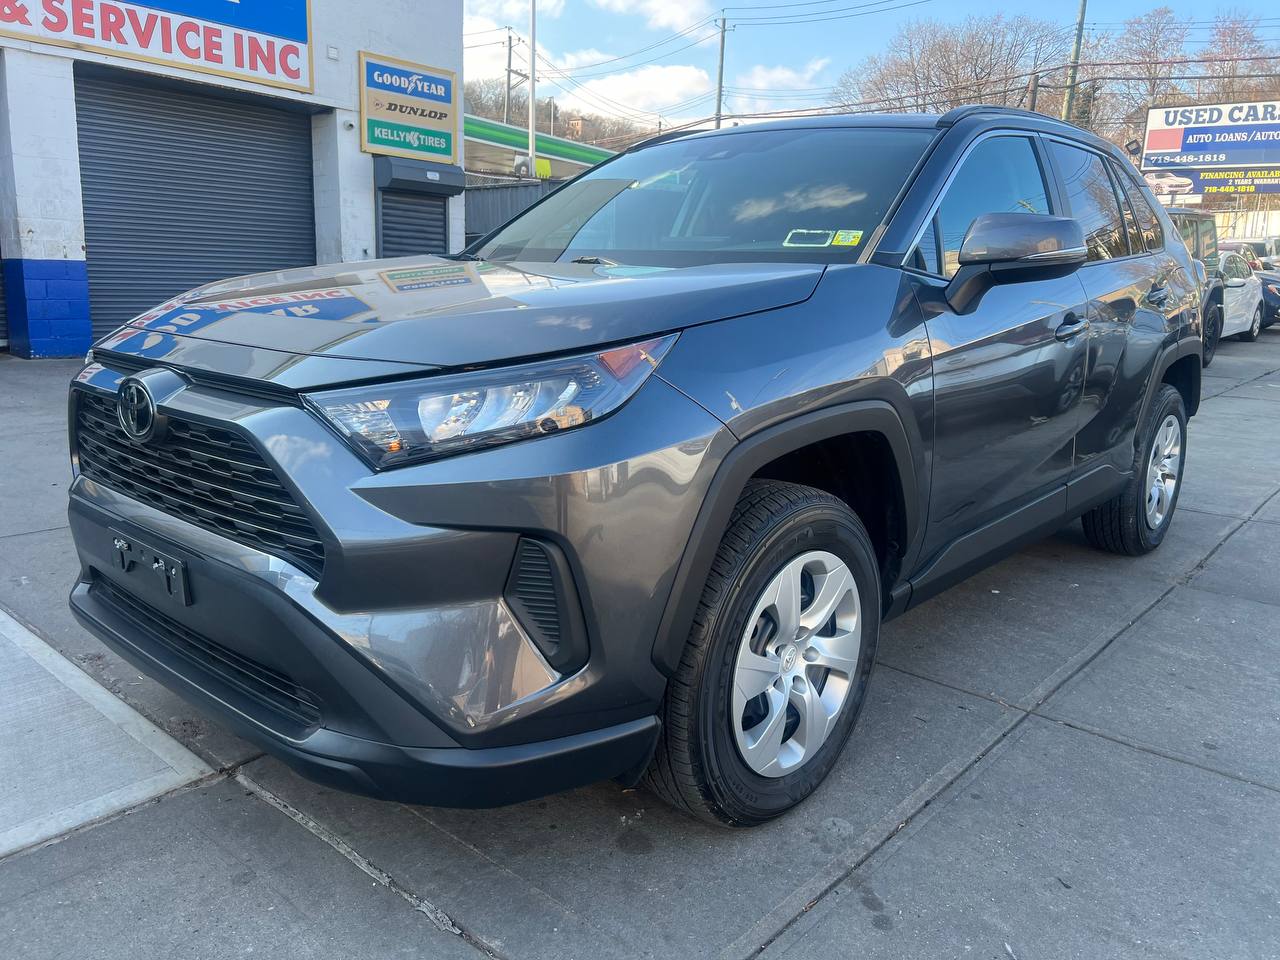 Used Car for sale - 2021 RAV4 LE AWD Toyota  in Staten Island, NY